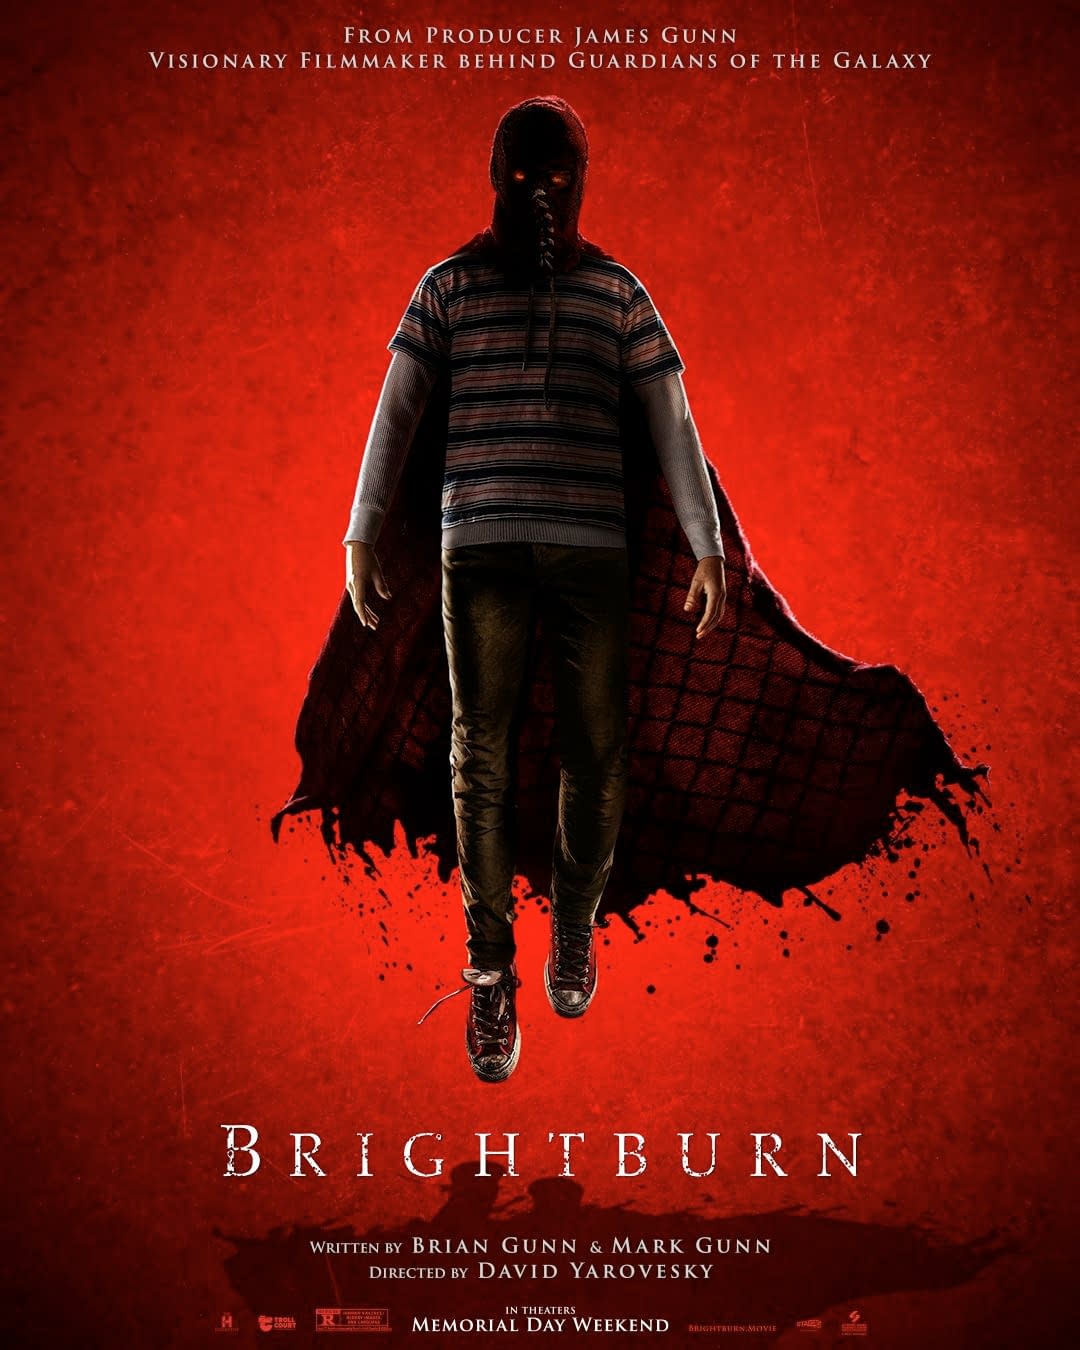 New Extended Trailer for Brightburn Teases New Footage Plus a New Poster